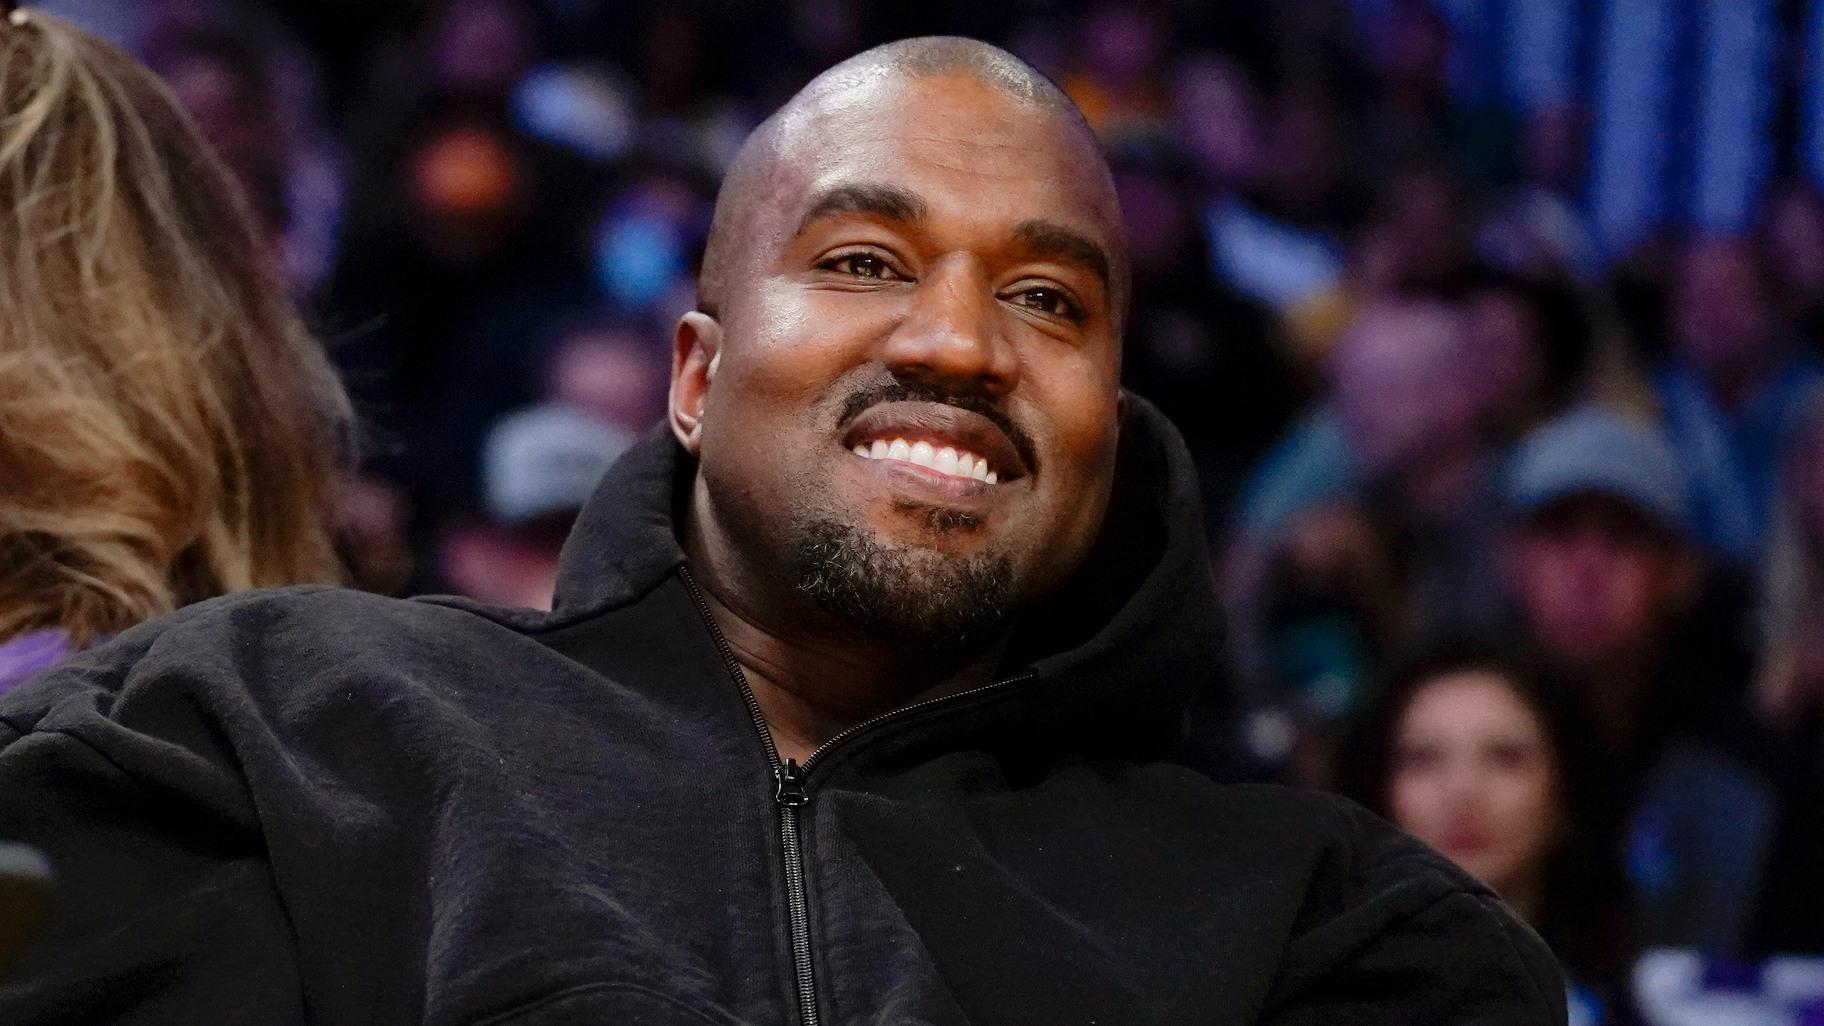 Kanye West watches the first half of an NBA basketball game between the Washington Wizards and the Los Angeles Lakers in Los Angeles, on March 11, 2022. (AP Photo / Ashley Landis, File)